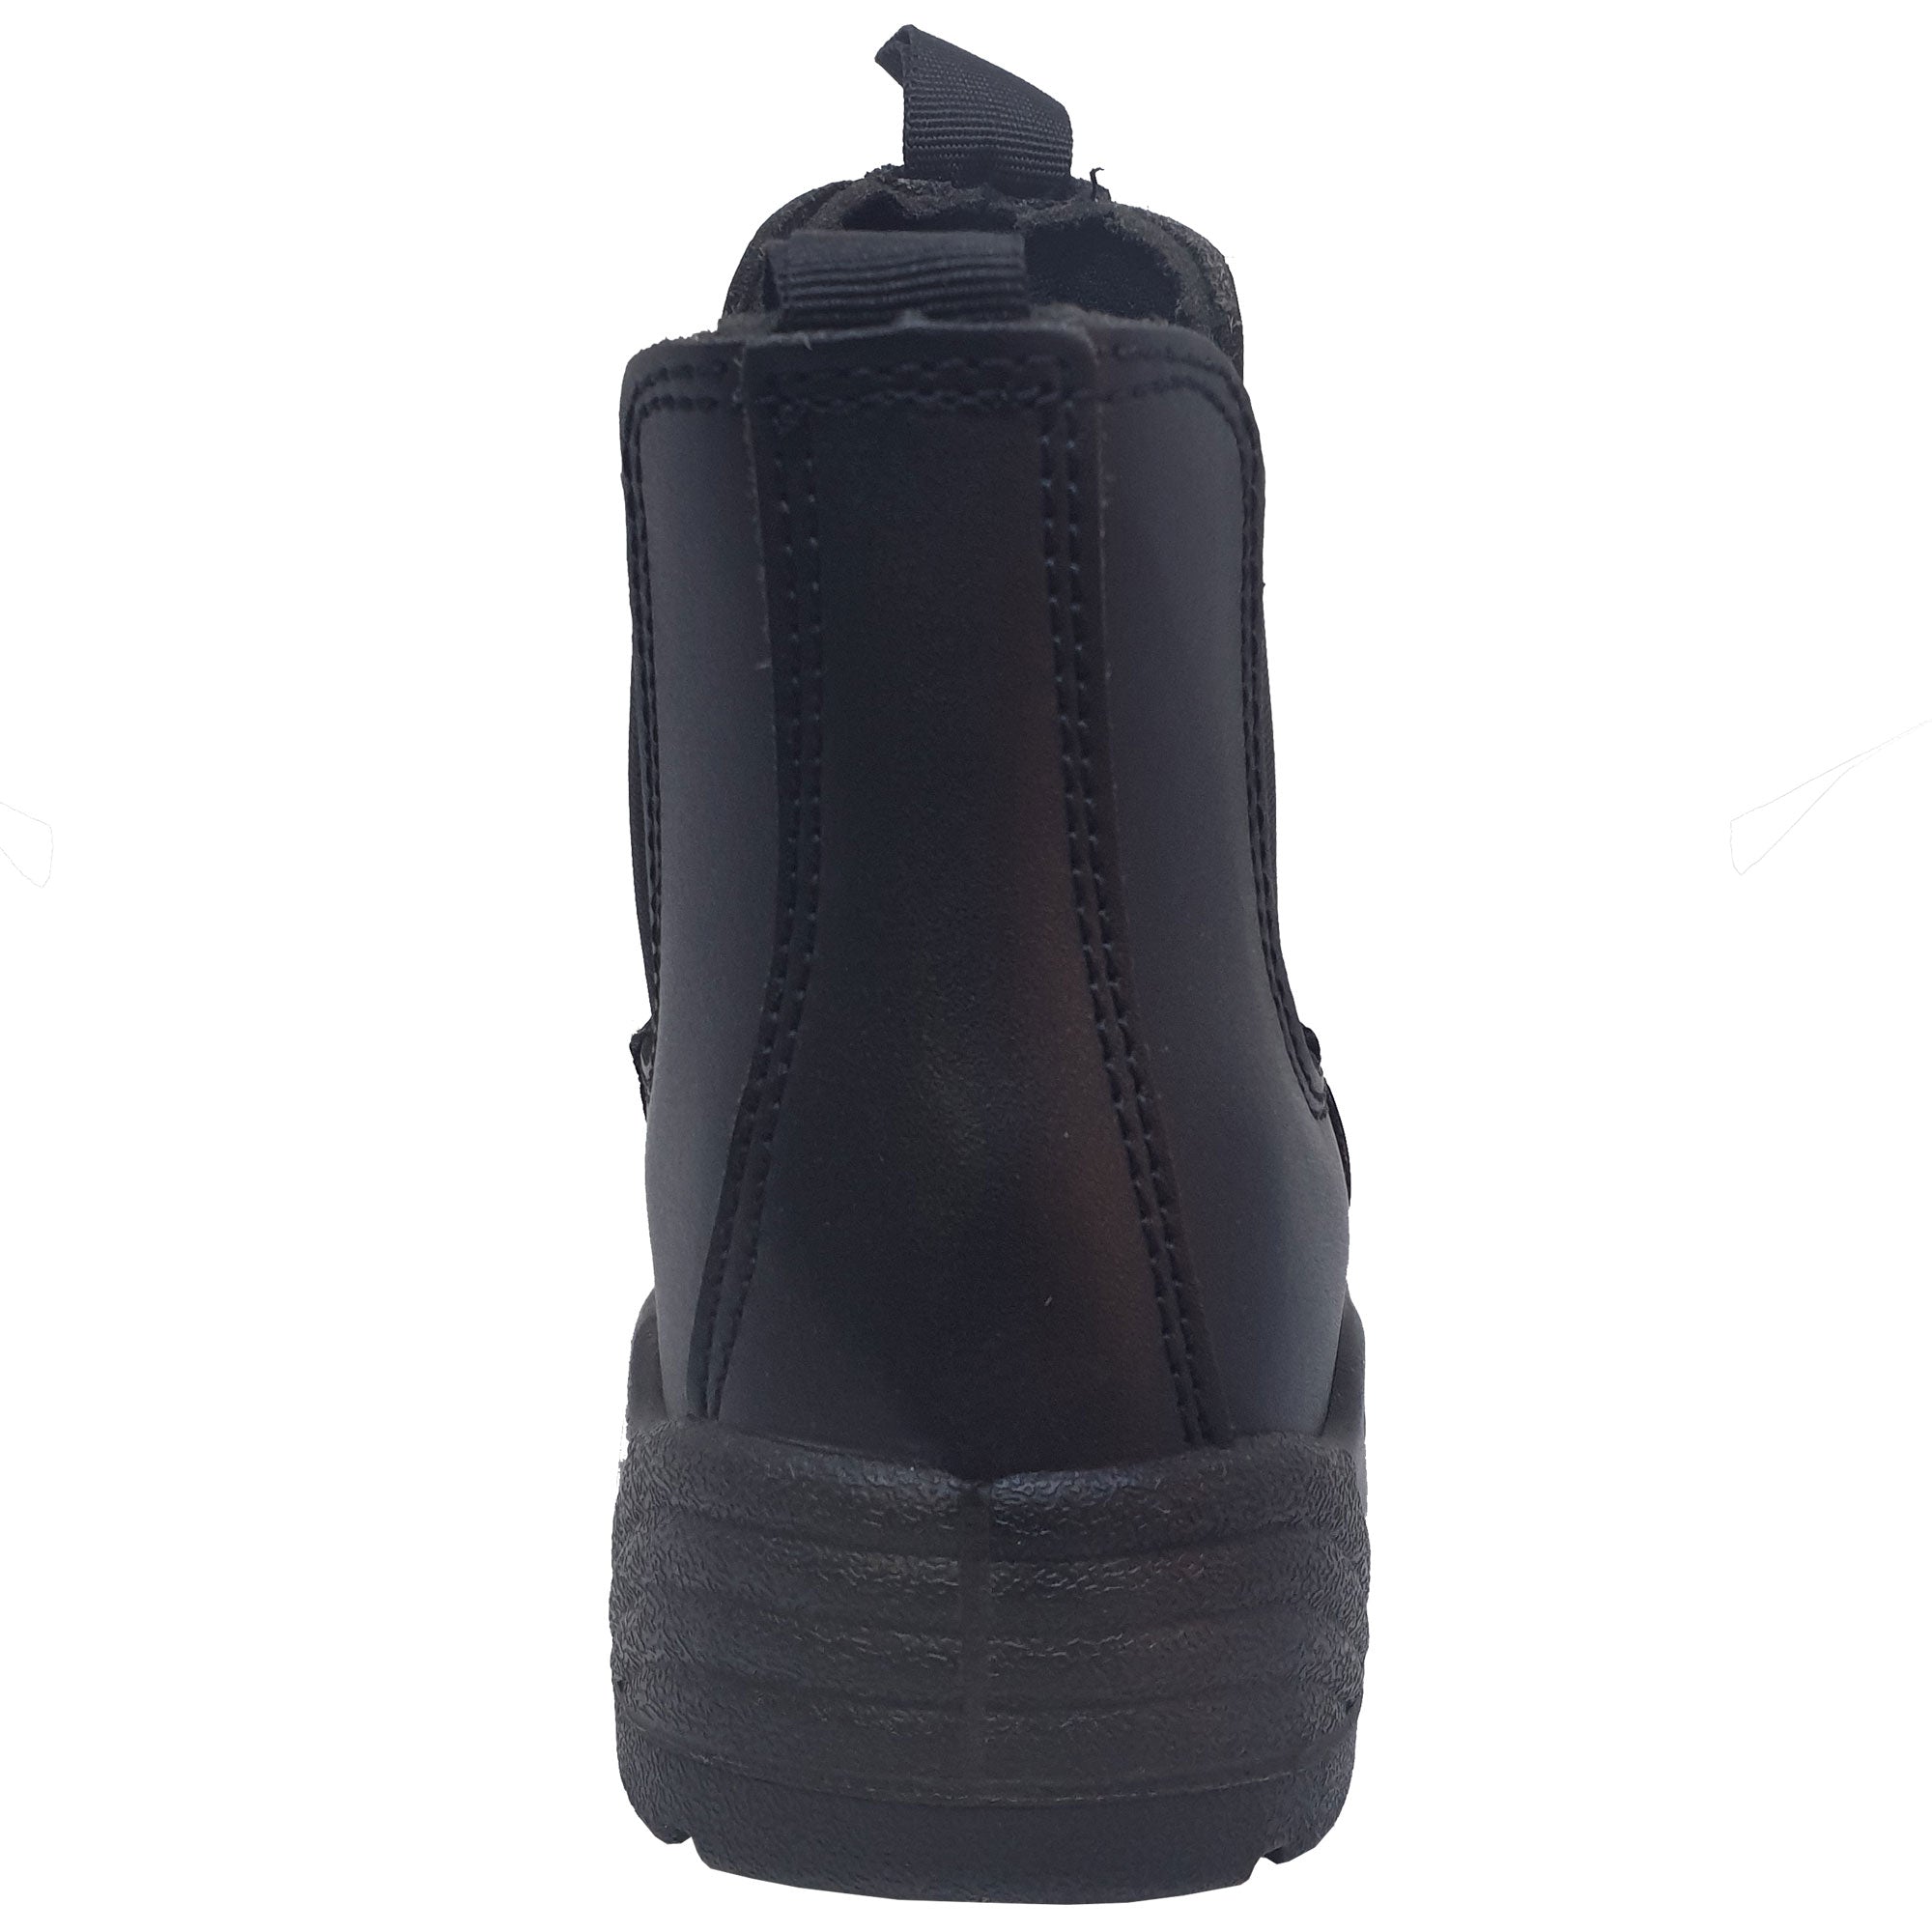 Pinnacle AUSTRA Safety Boots - Chelsea Black